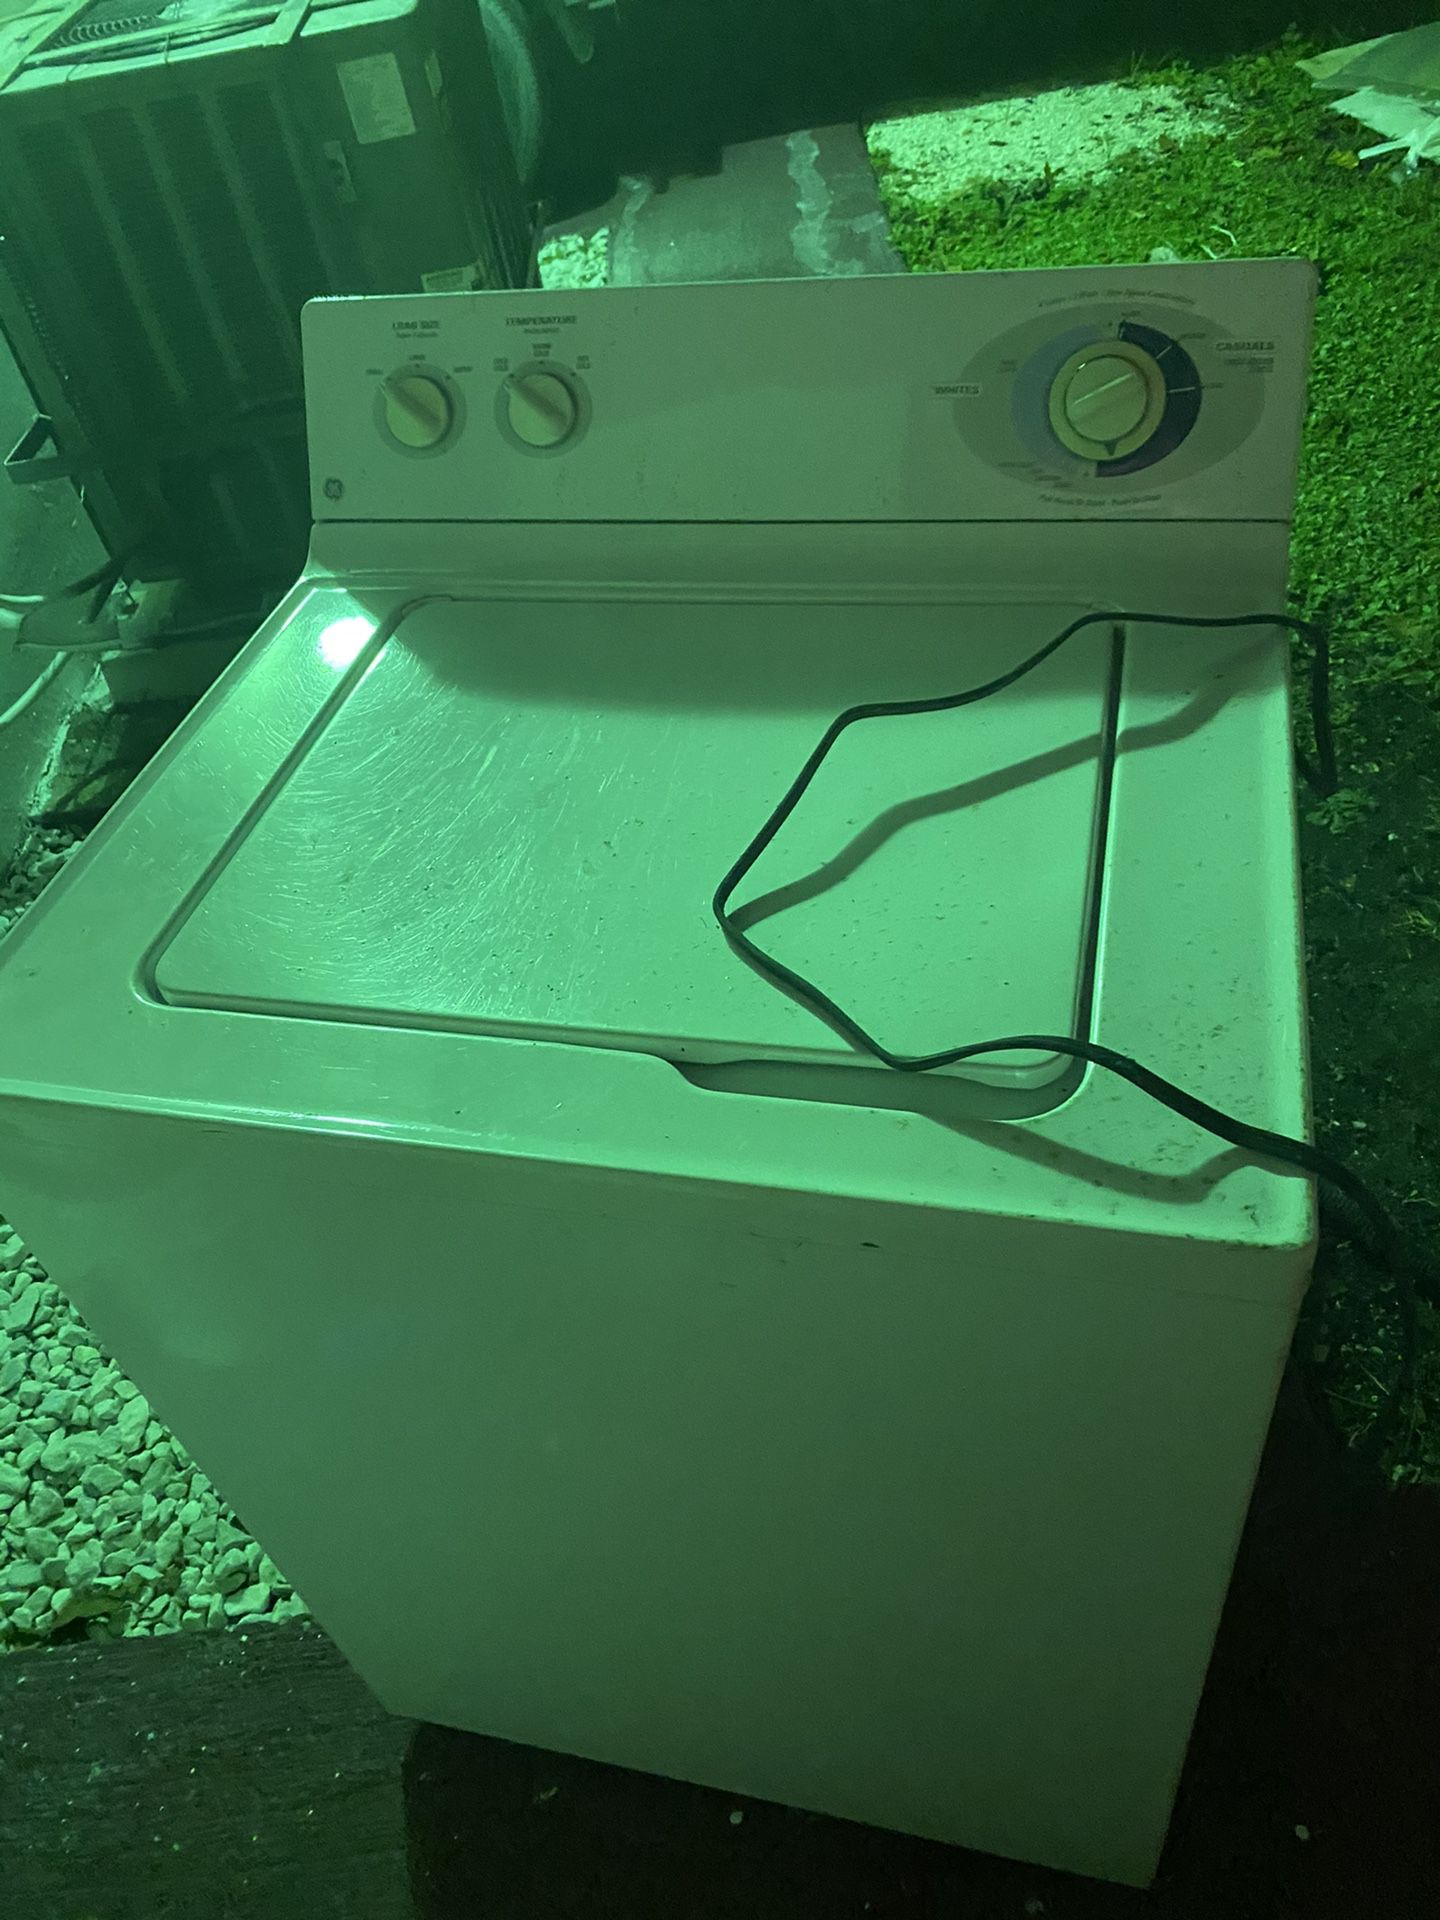 Free not working dryer washer